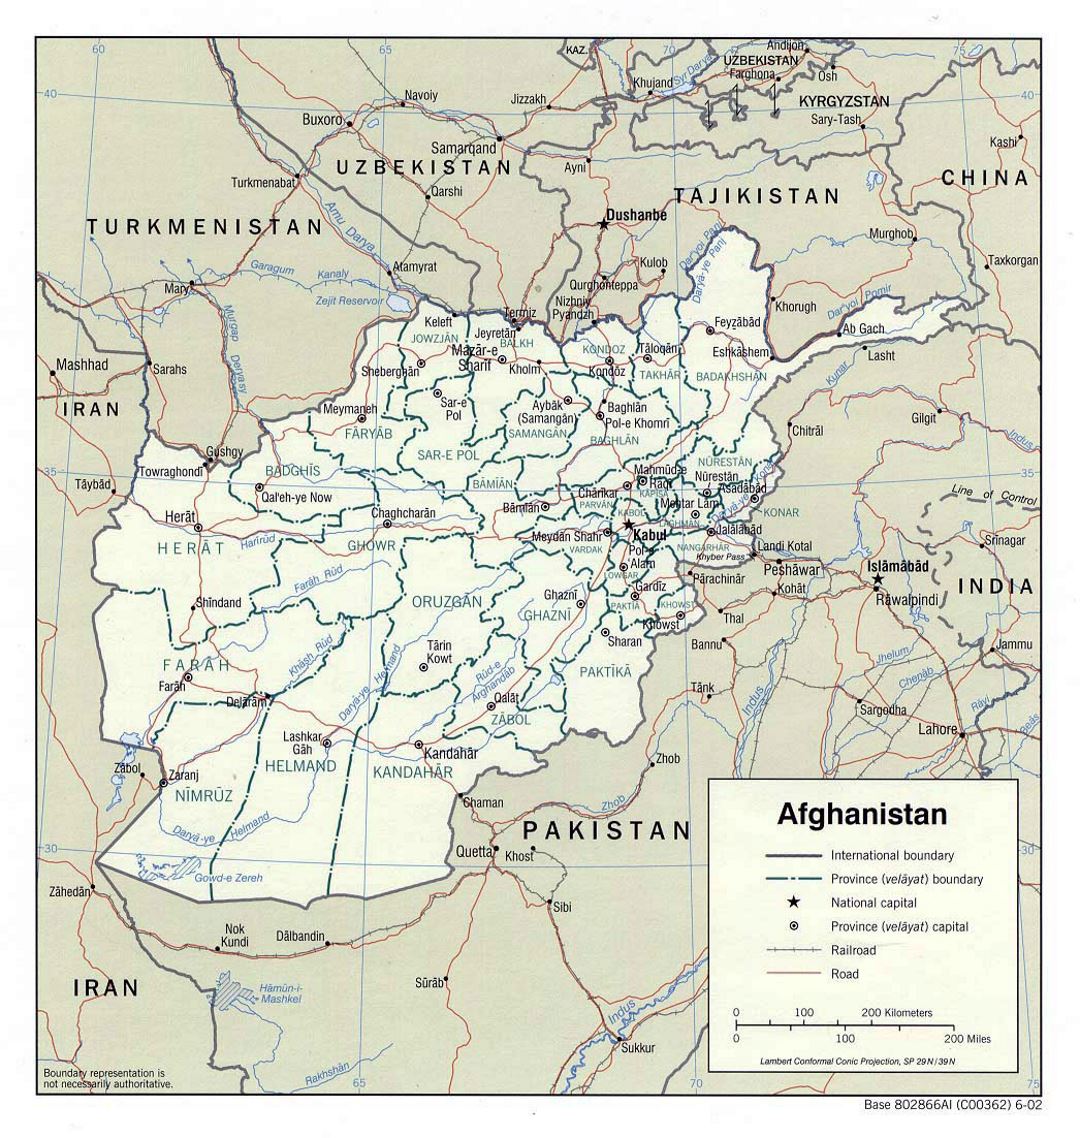 Detailed political and administrative map of Afghanistan - 2002